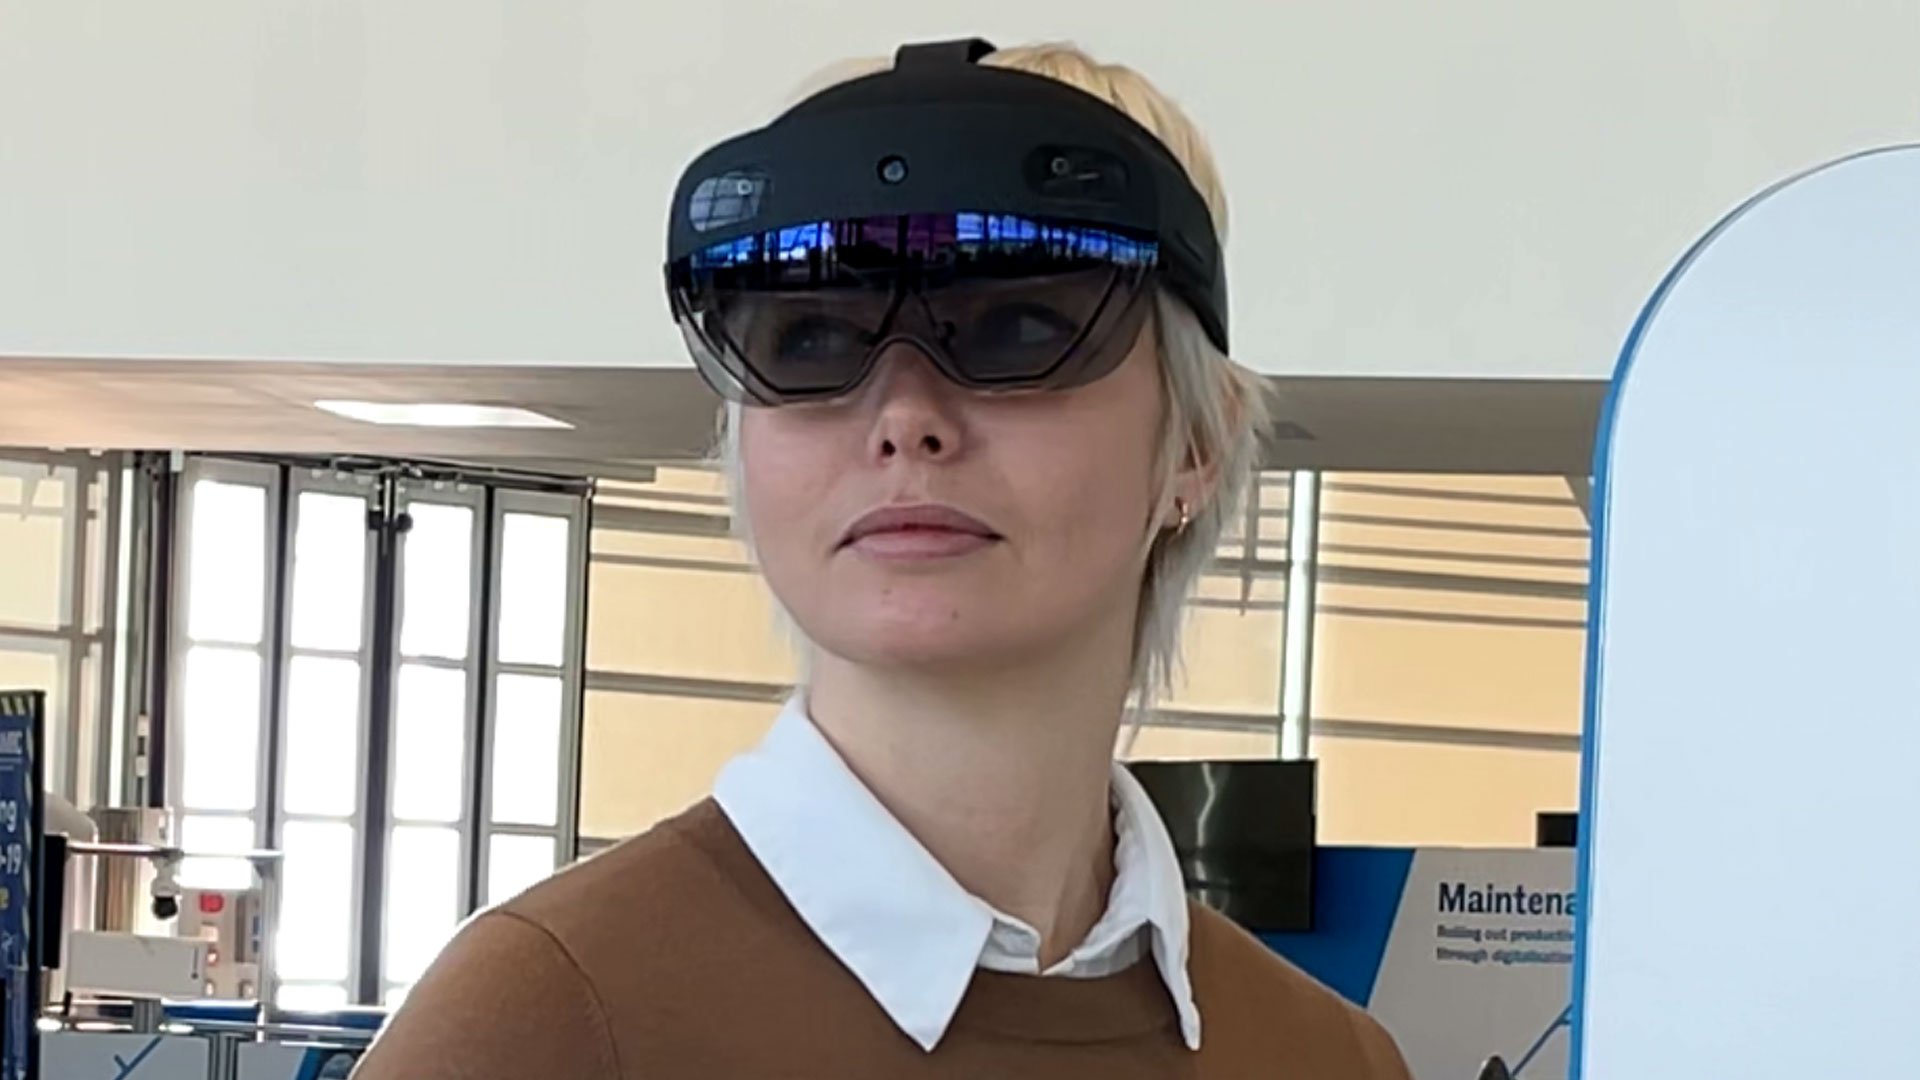 Microsoft HoloLens 2 in an engineering environment